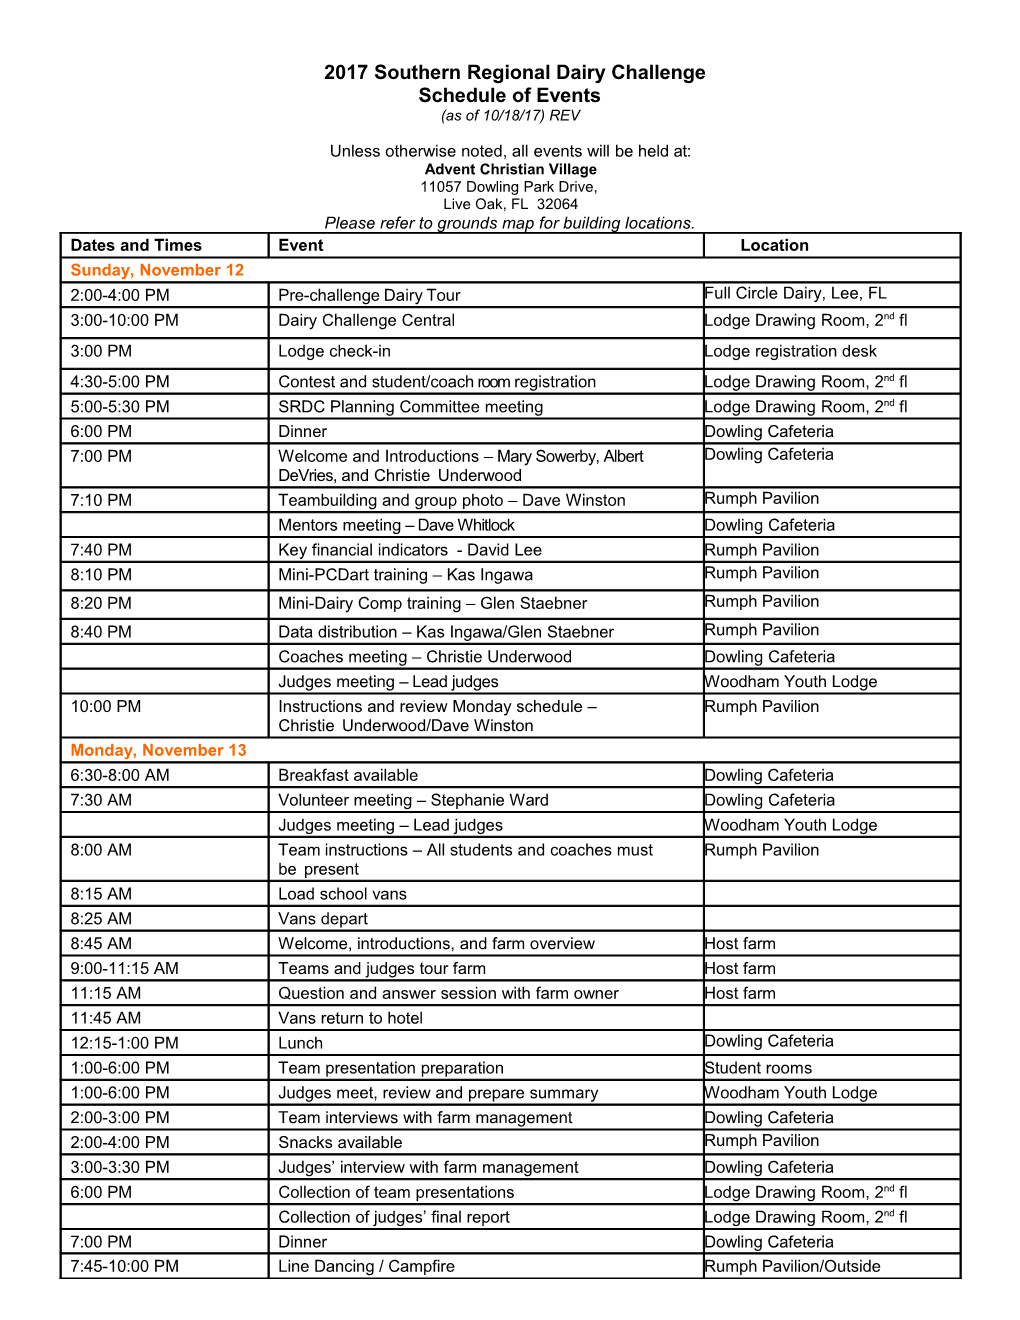 2017 Southern Regional Dairy Challenge Schedule of Events